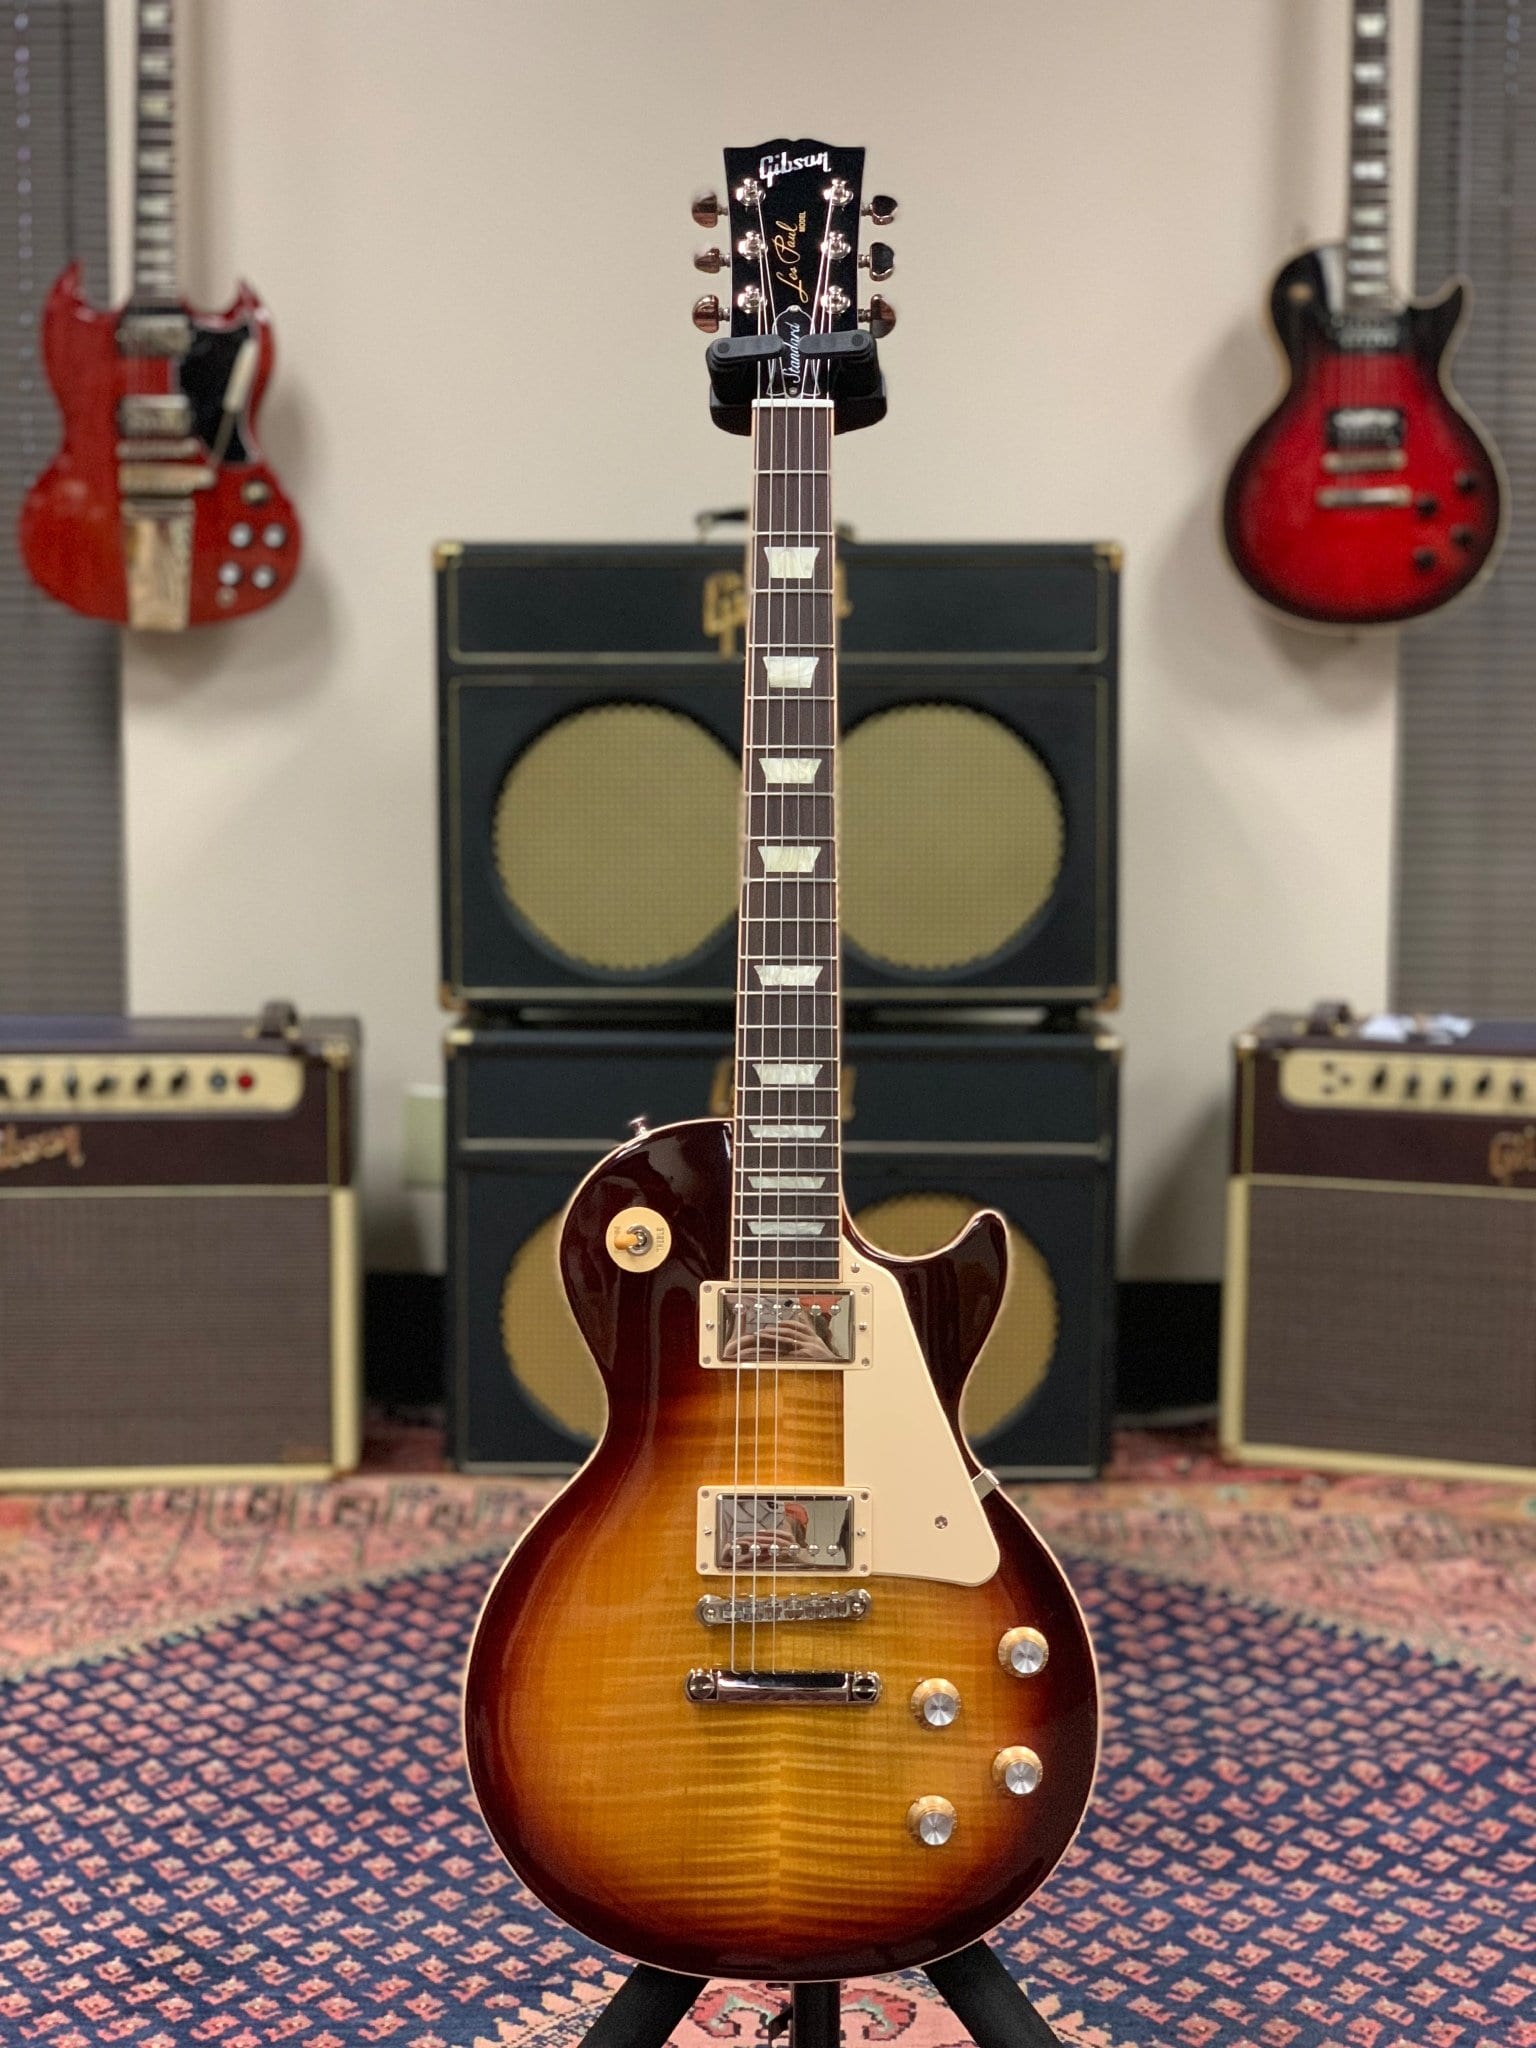 Gibson 2019 Lineup revealed at last - A return to quality and 